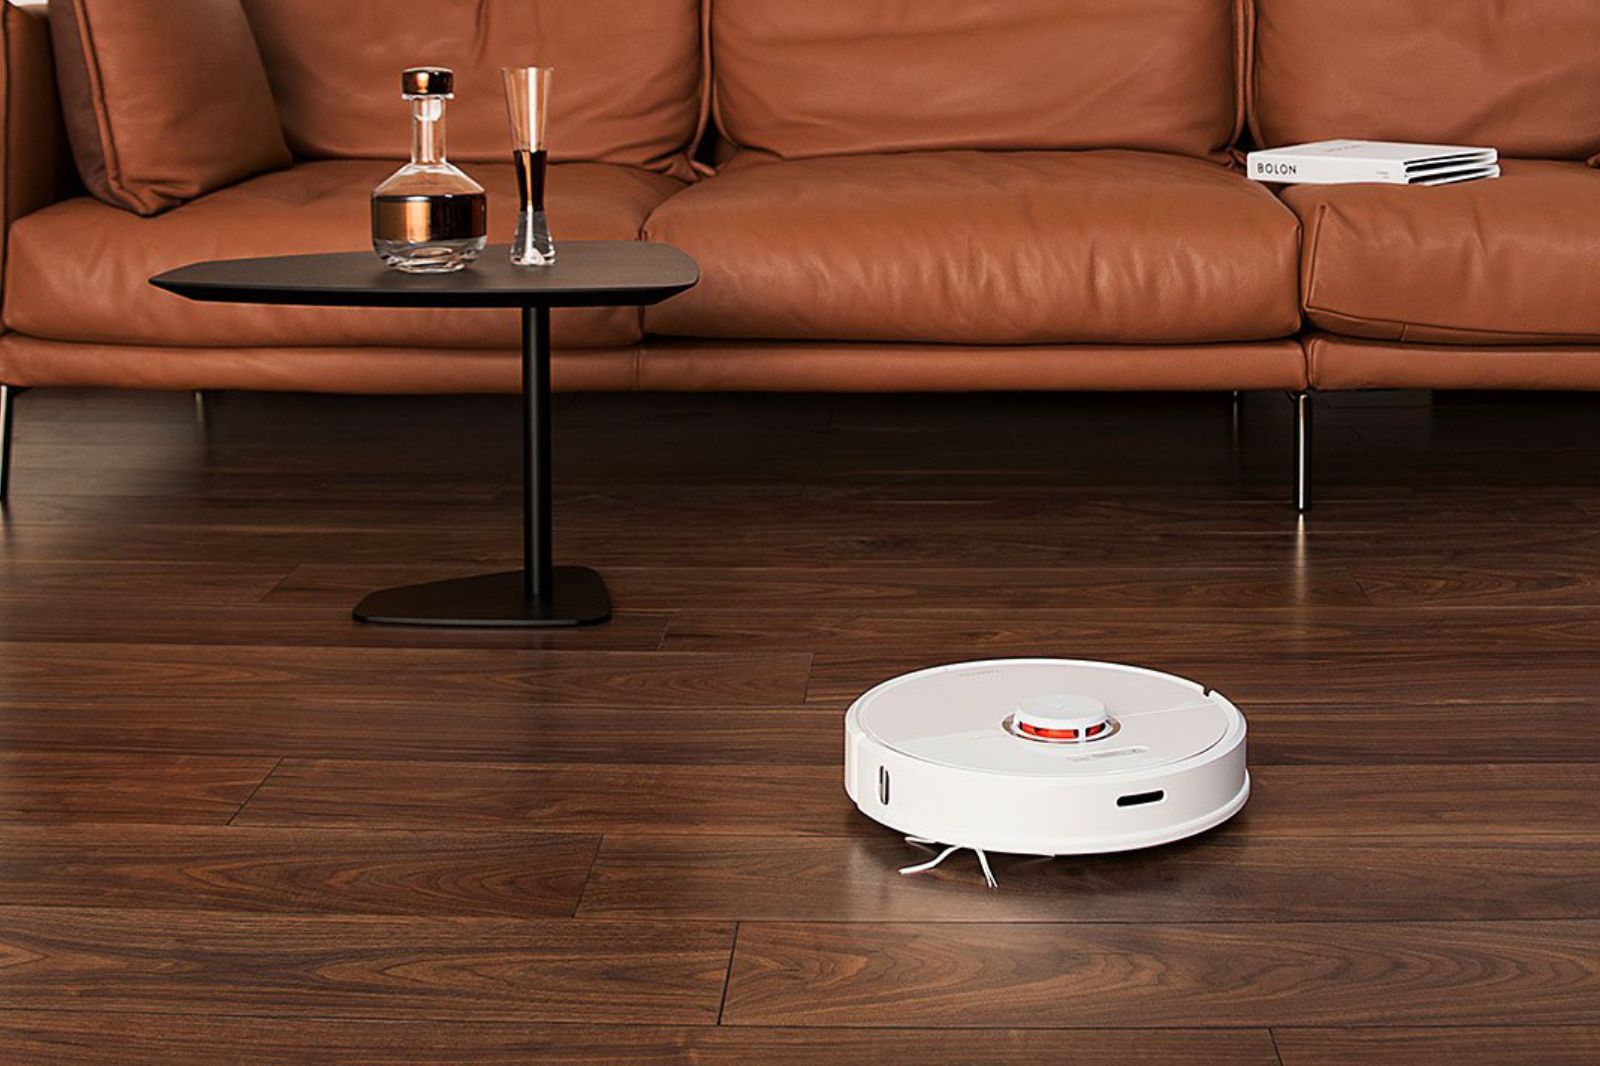 One of our readers spent two months with the Roborock S6 Robot vacuum and this is what she found image 1